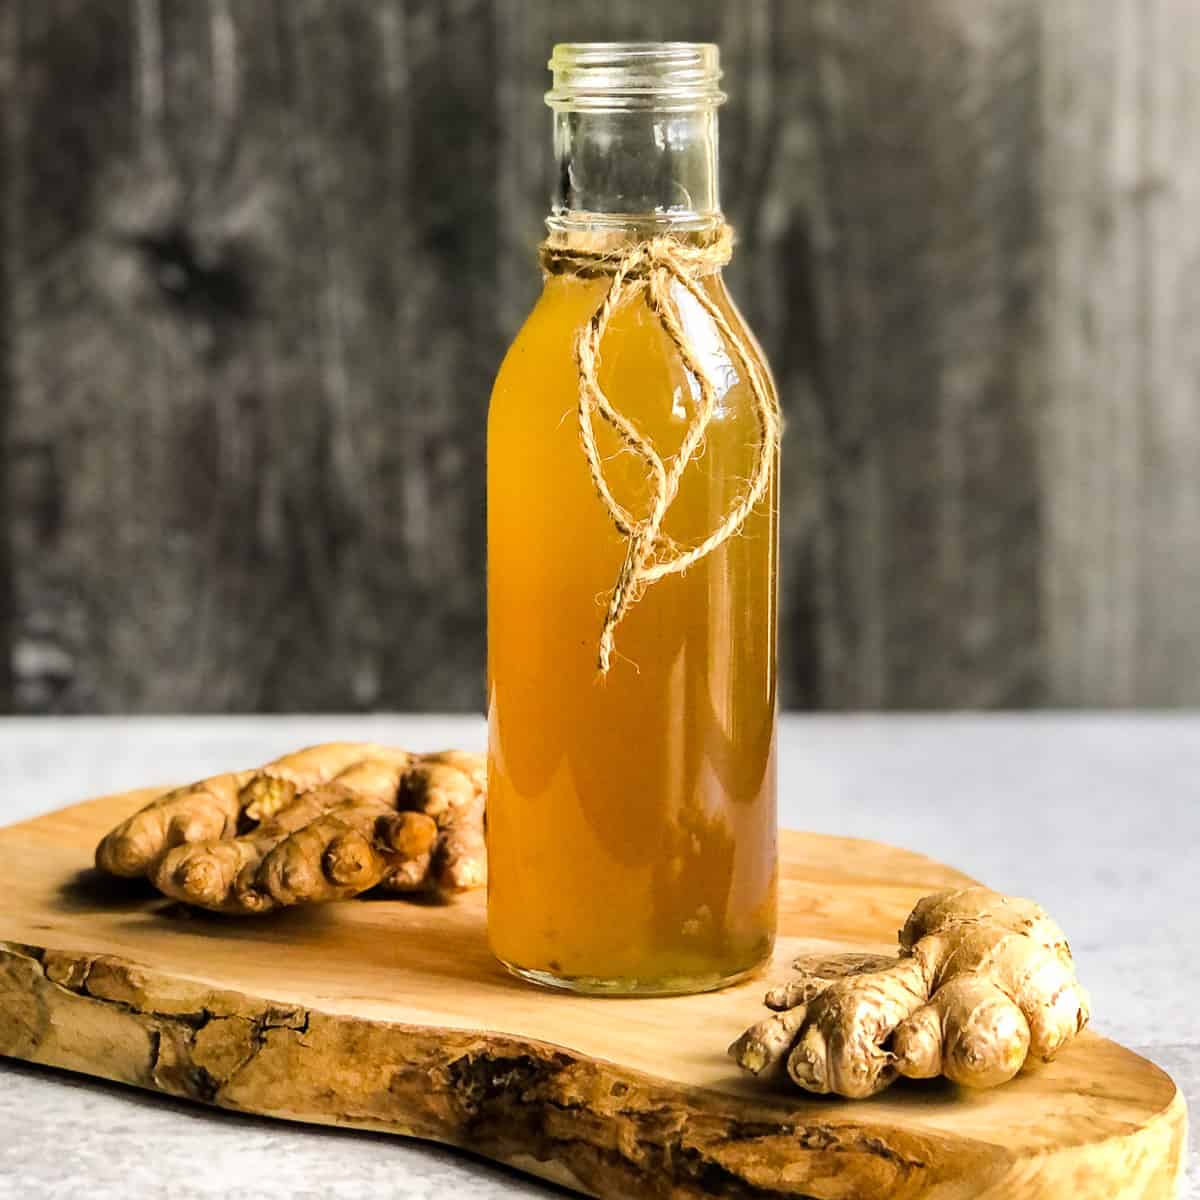 Bottle of spiced ginger syrup on a wood cutting board.